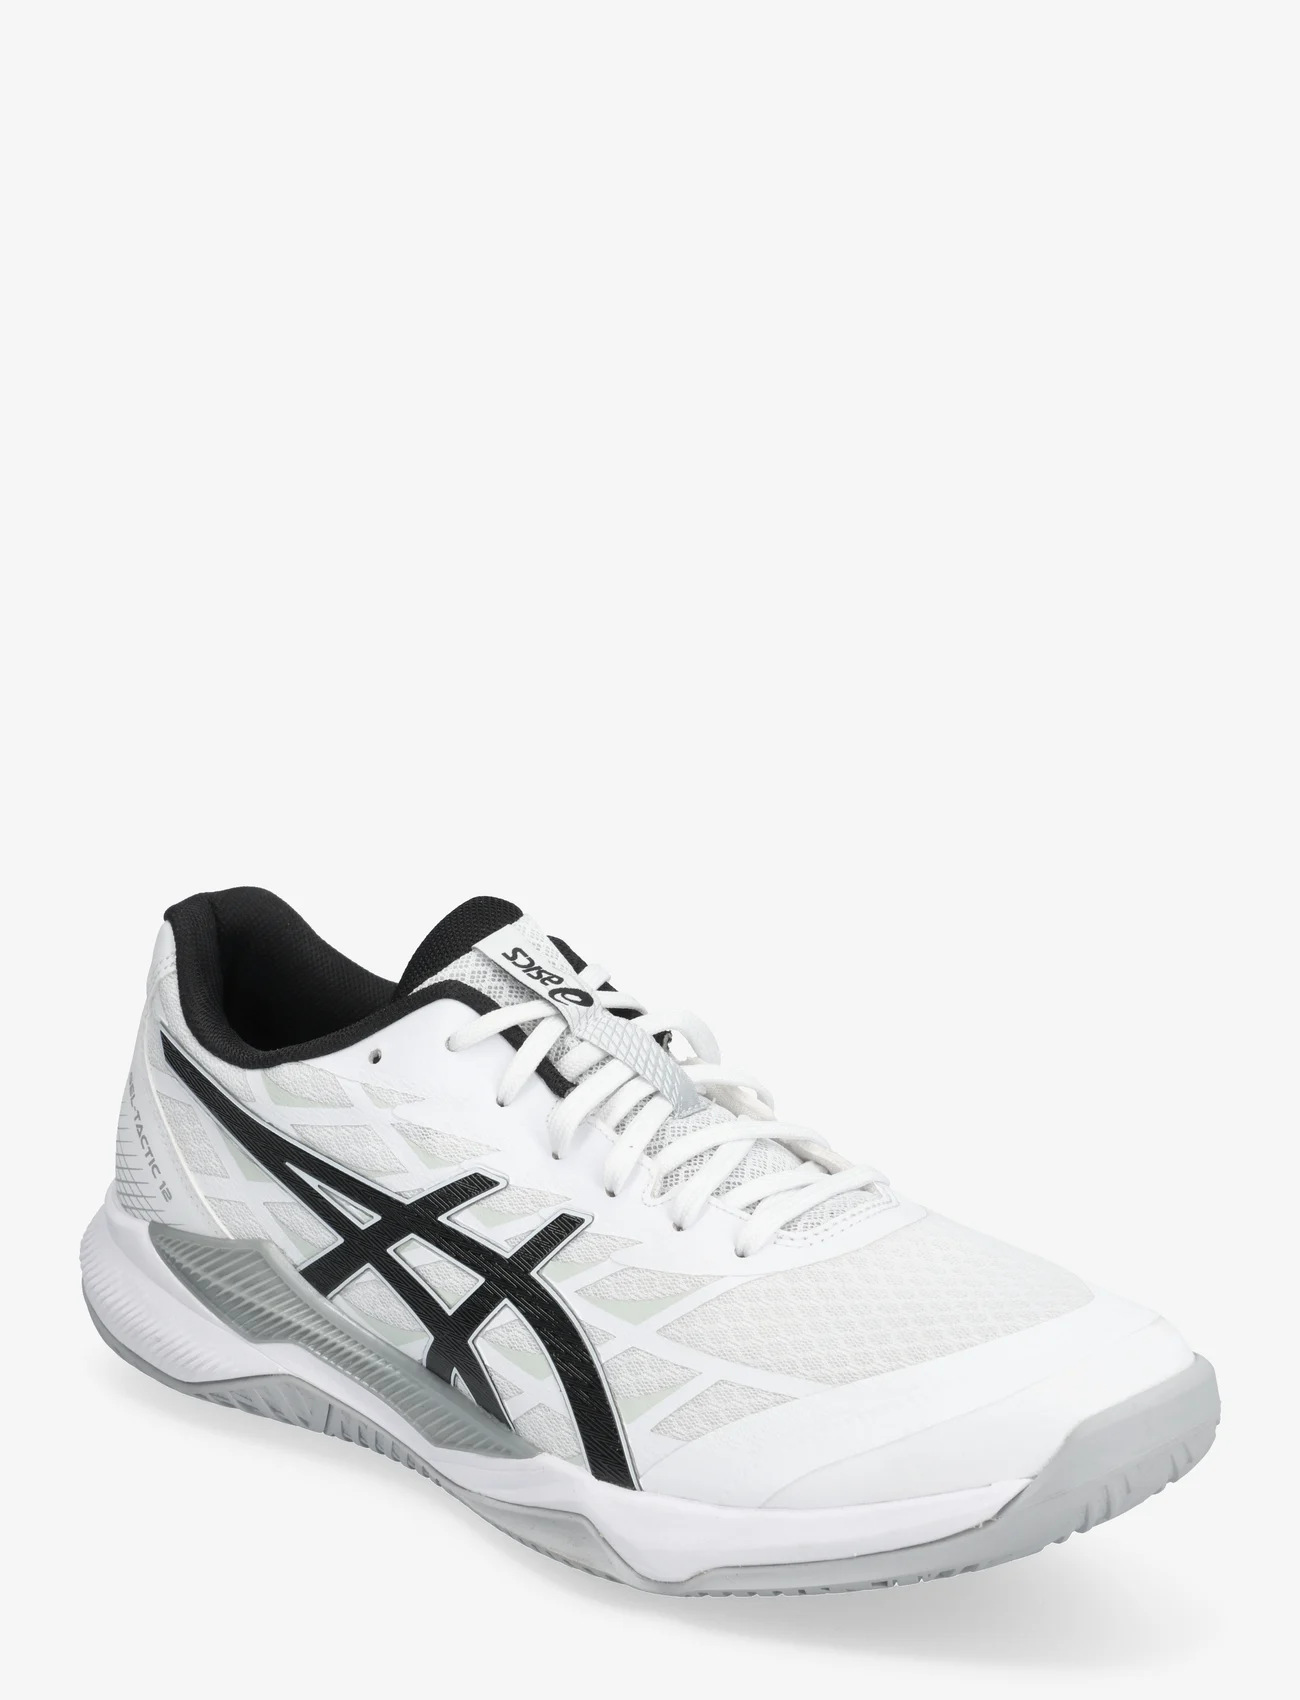 Asics - GEL-TACTIC 12 - indoor sports shoes - white/black - 0